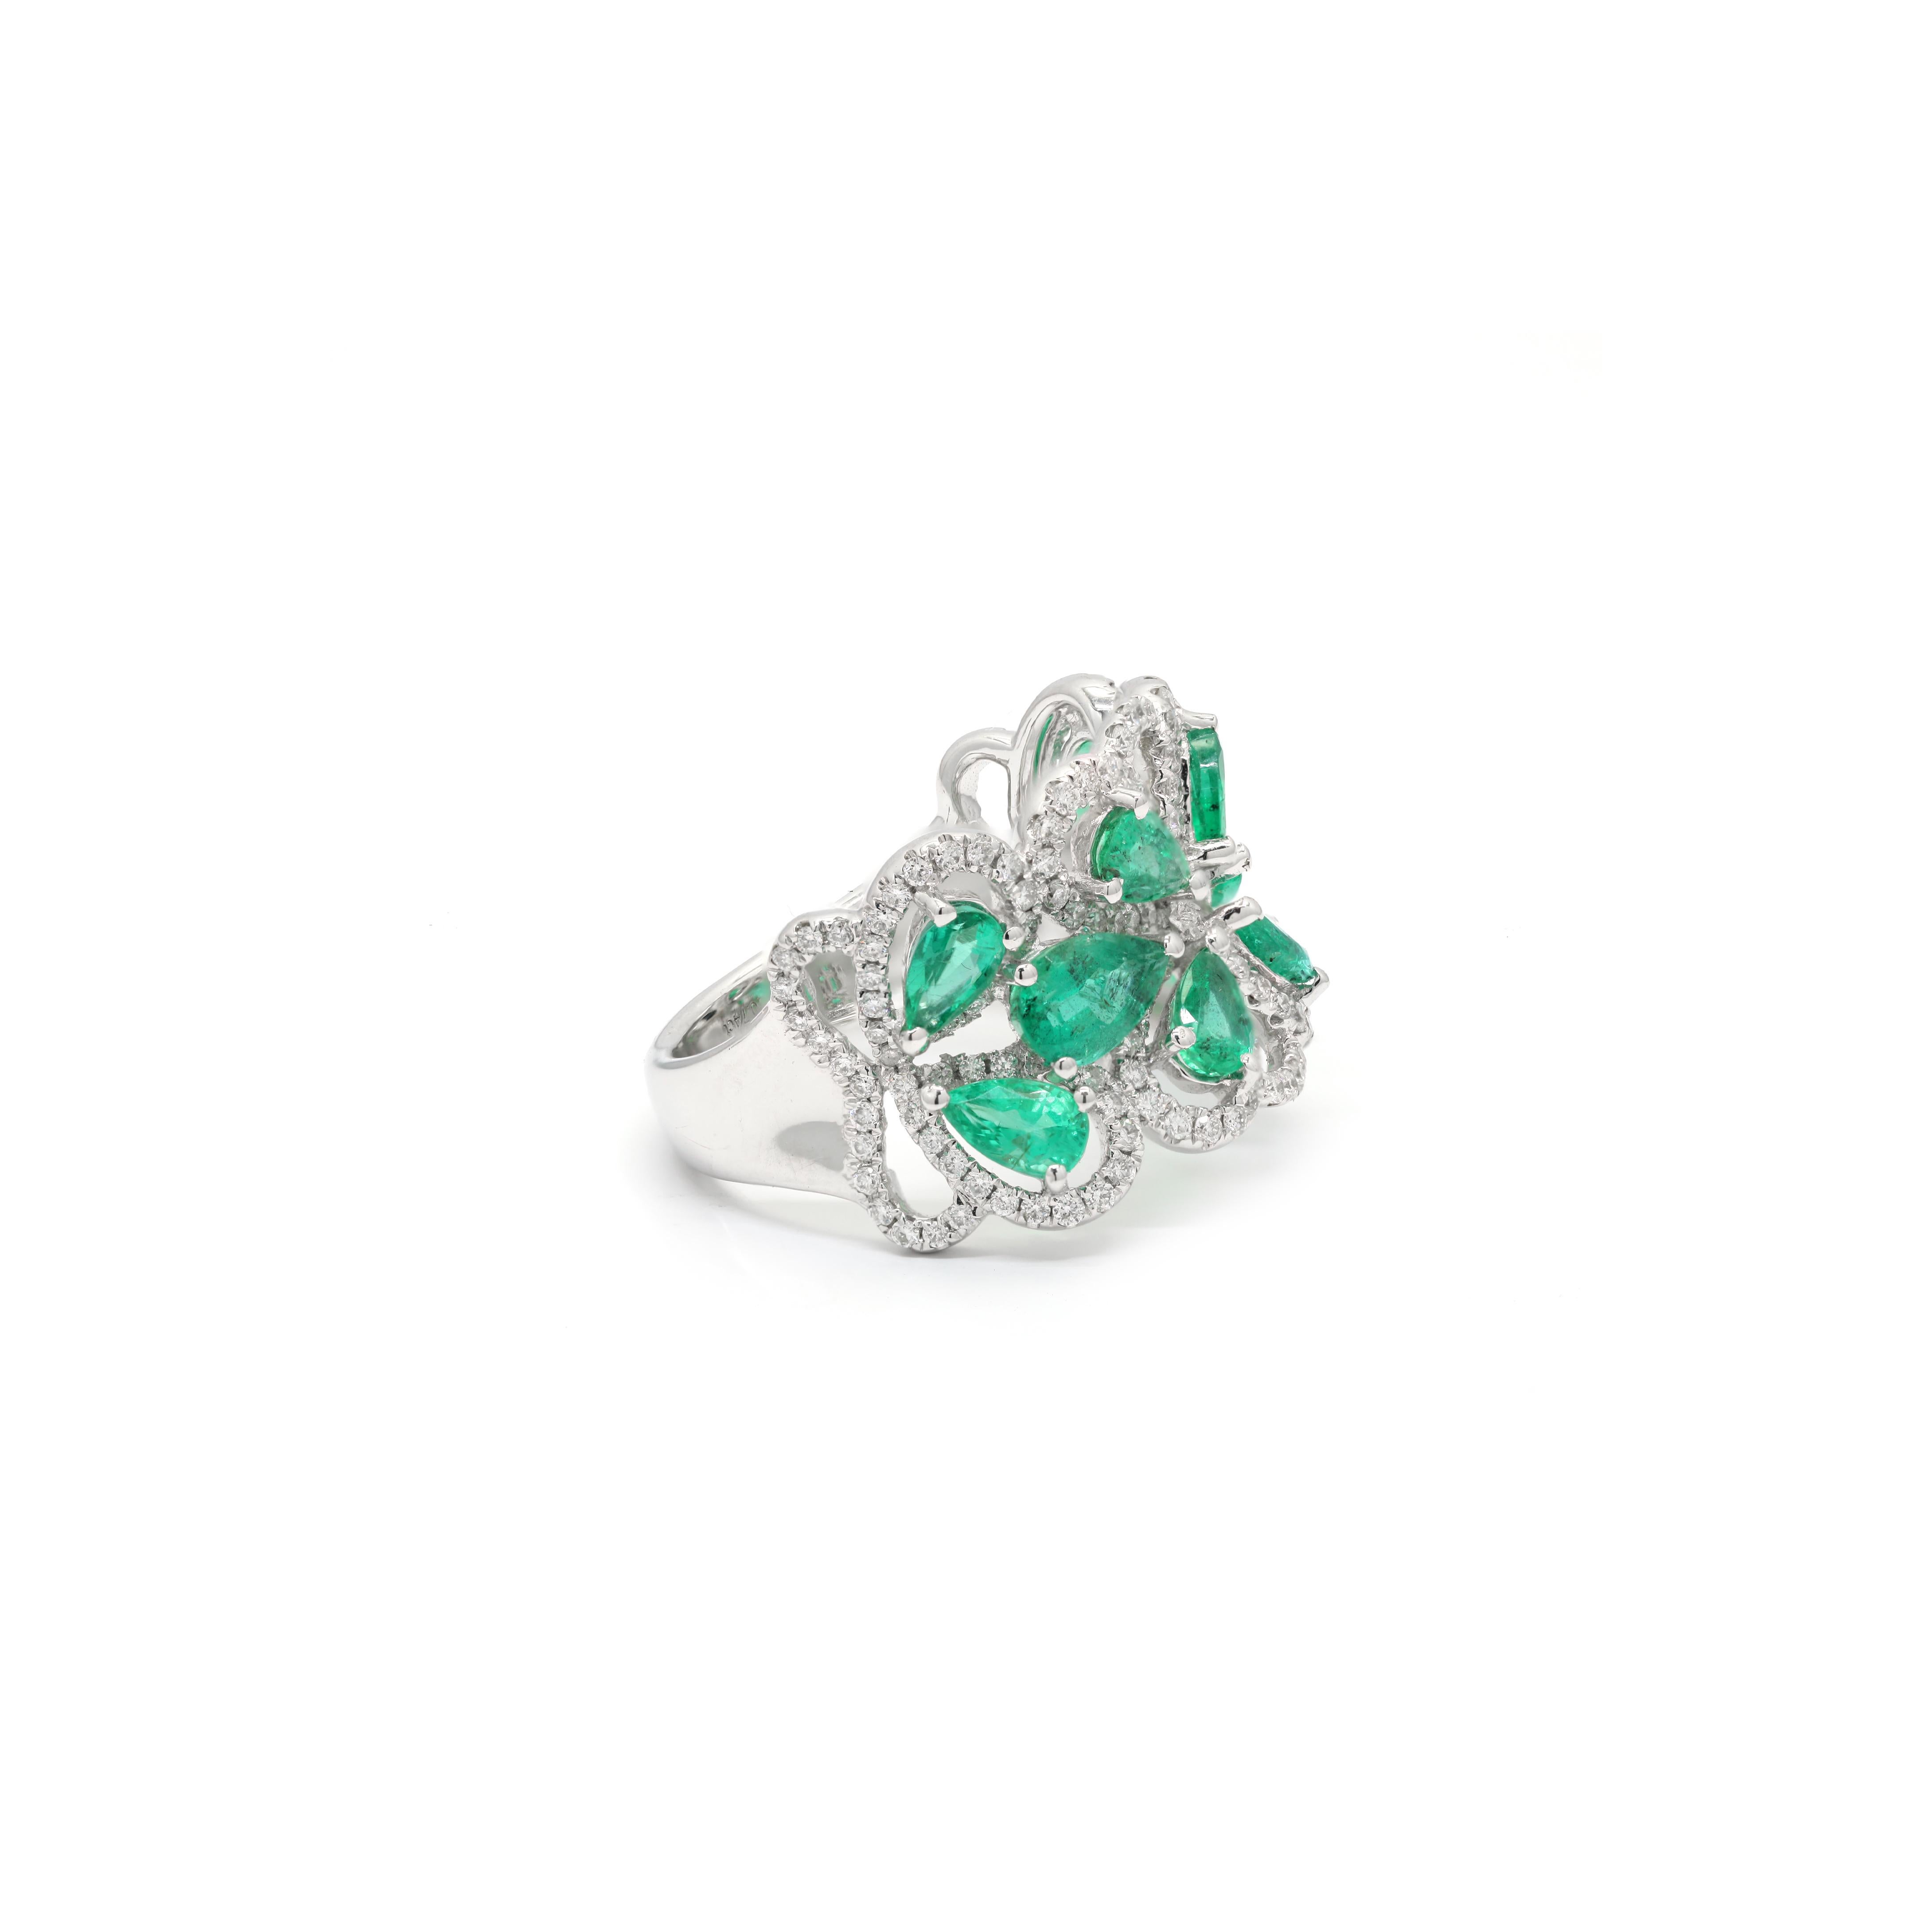 For Sale:  Bridal 14k White Gold Diamond and Emerald Ring 2